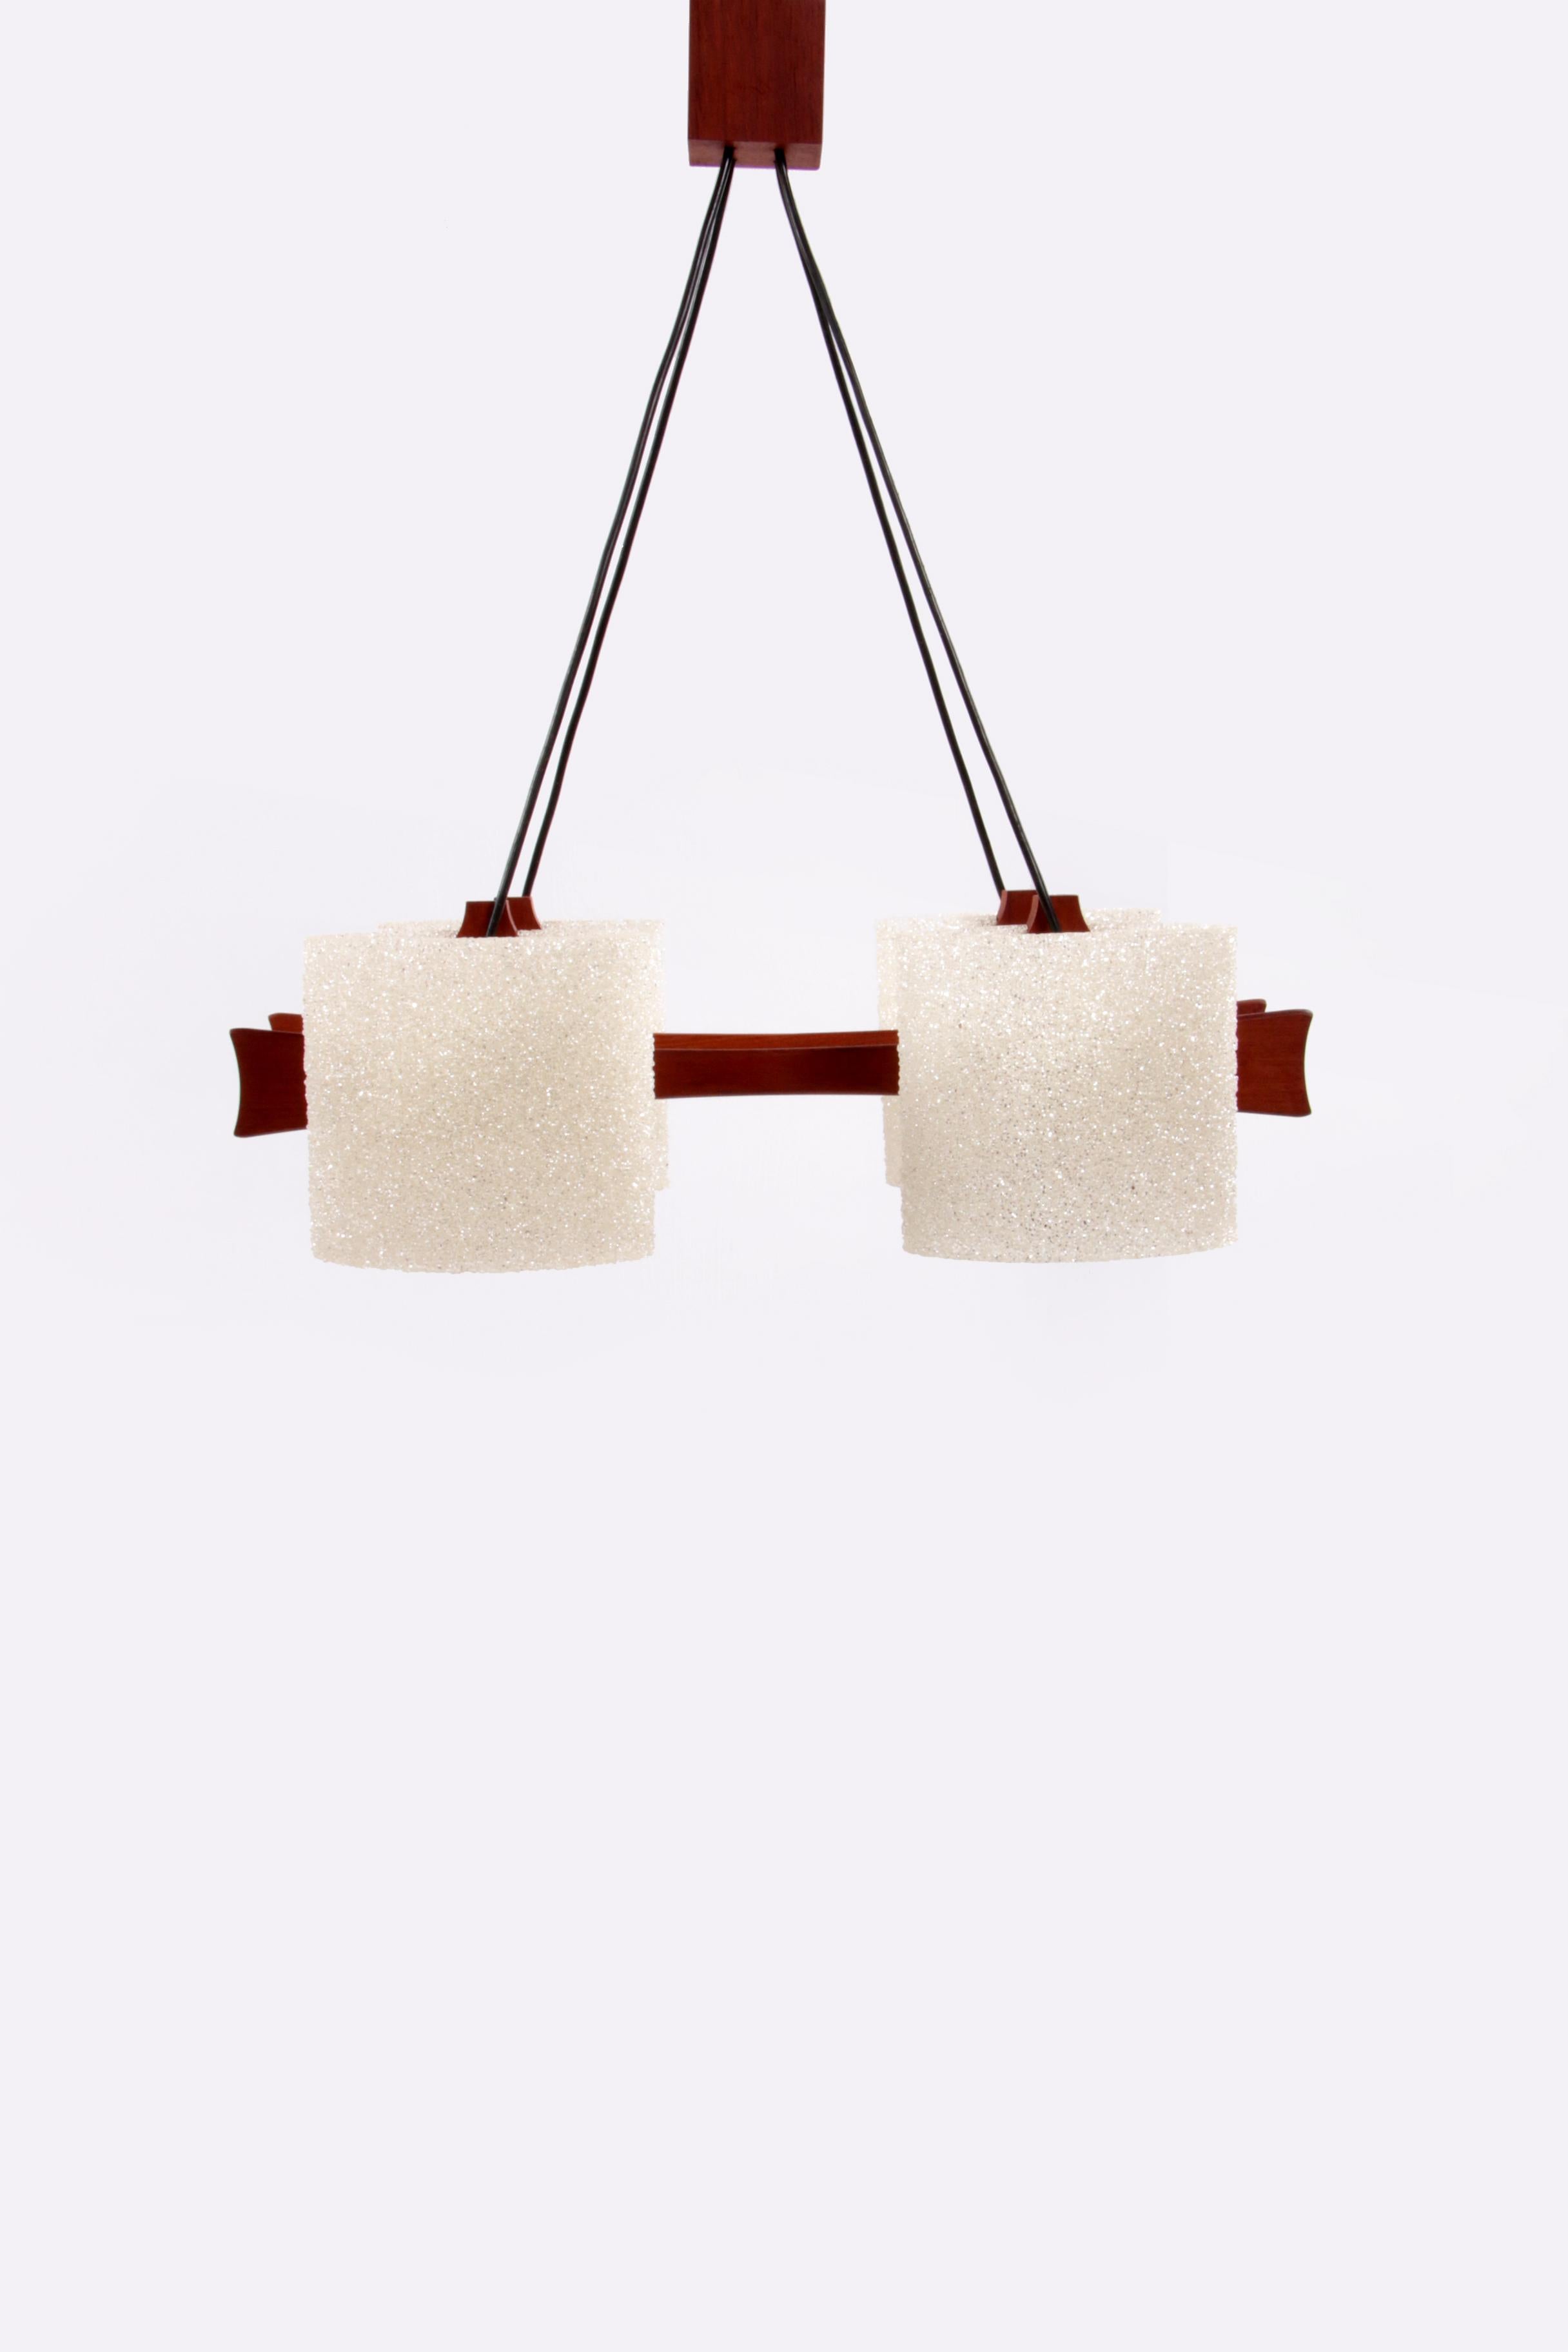 This is a beautiful hanging lamp with four lampshades and an e14 fitting.

The wood is teak and the caps are made of a kind of hard resin with small pits.

Fits in a modern interior or many others.

Sustainable: environmentally conscious By